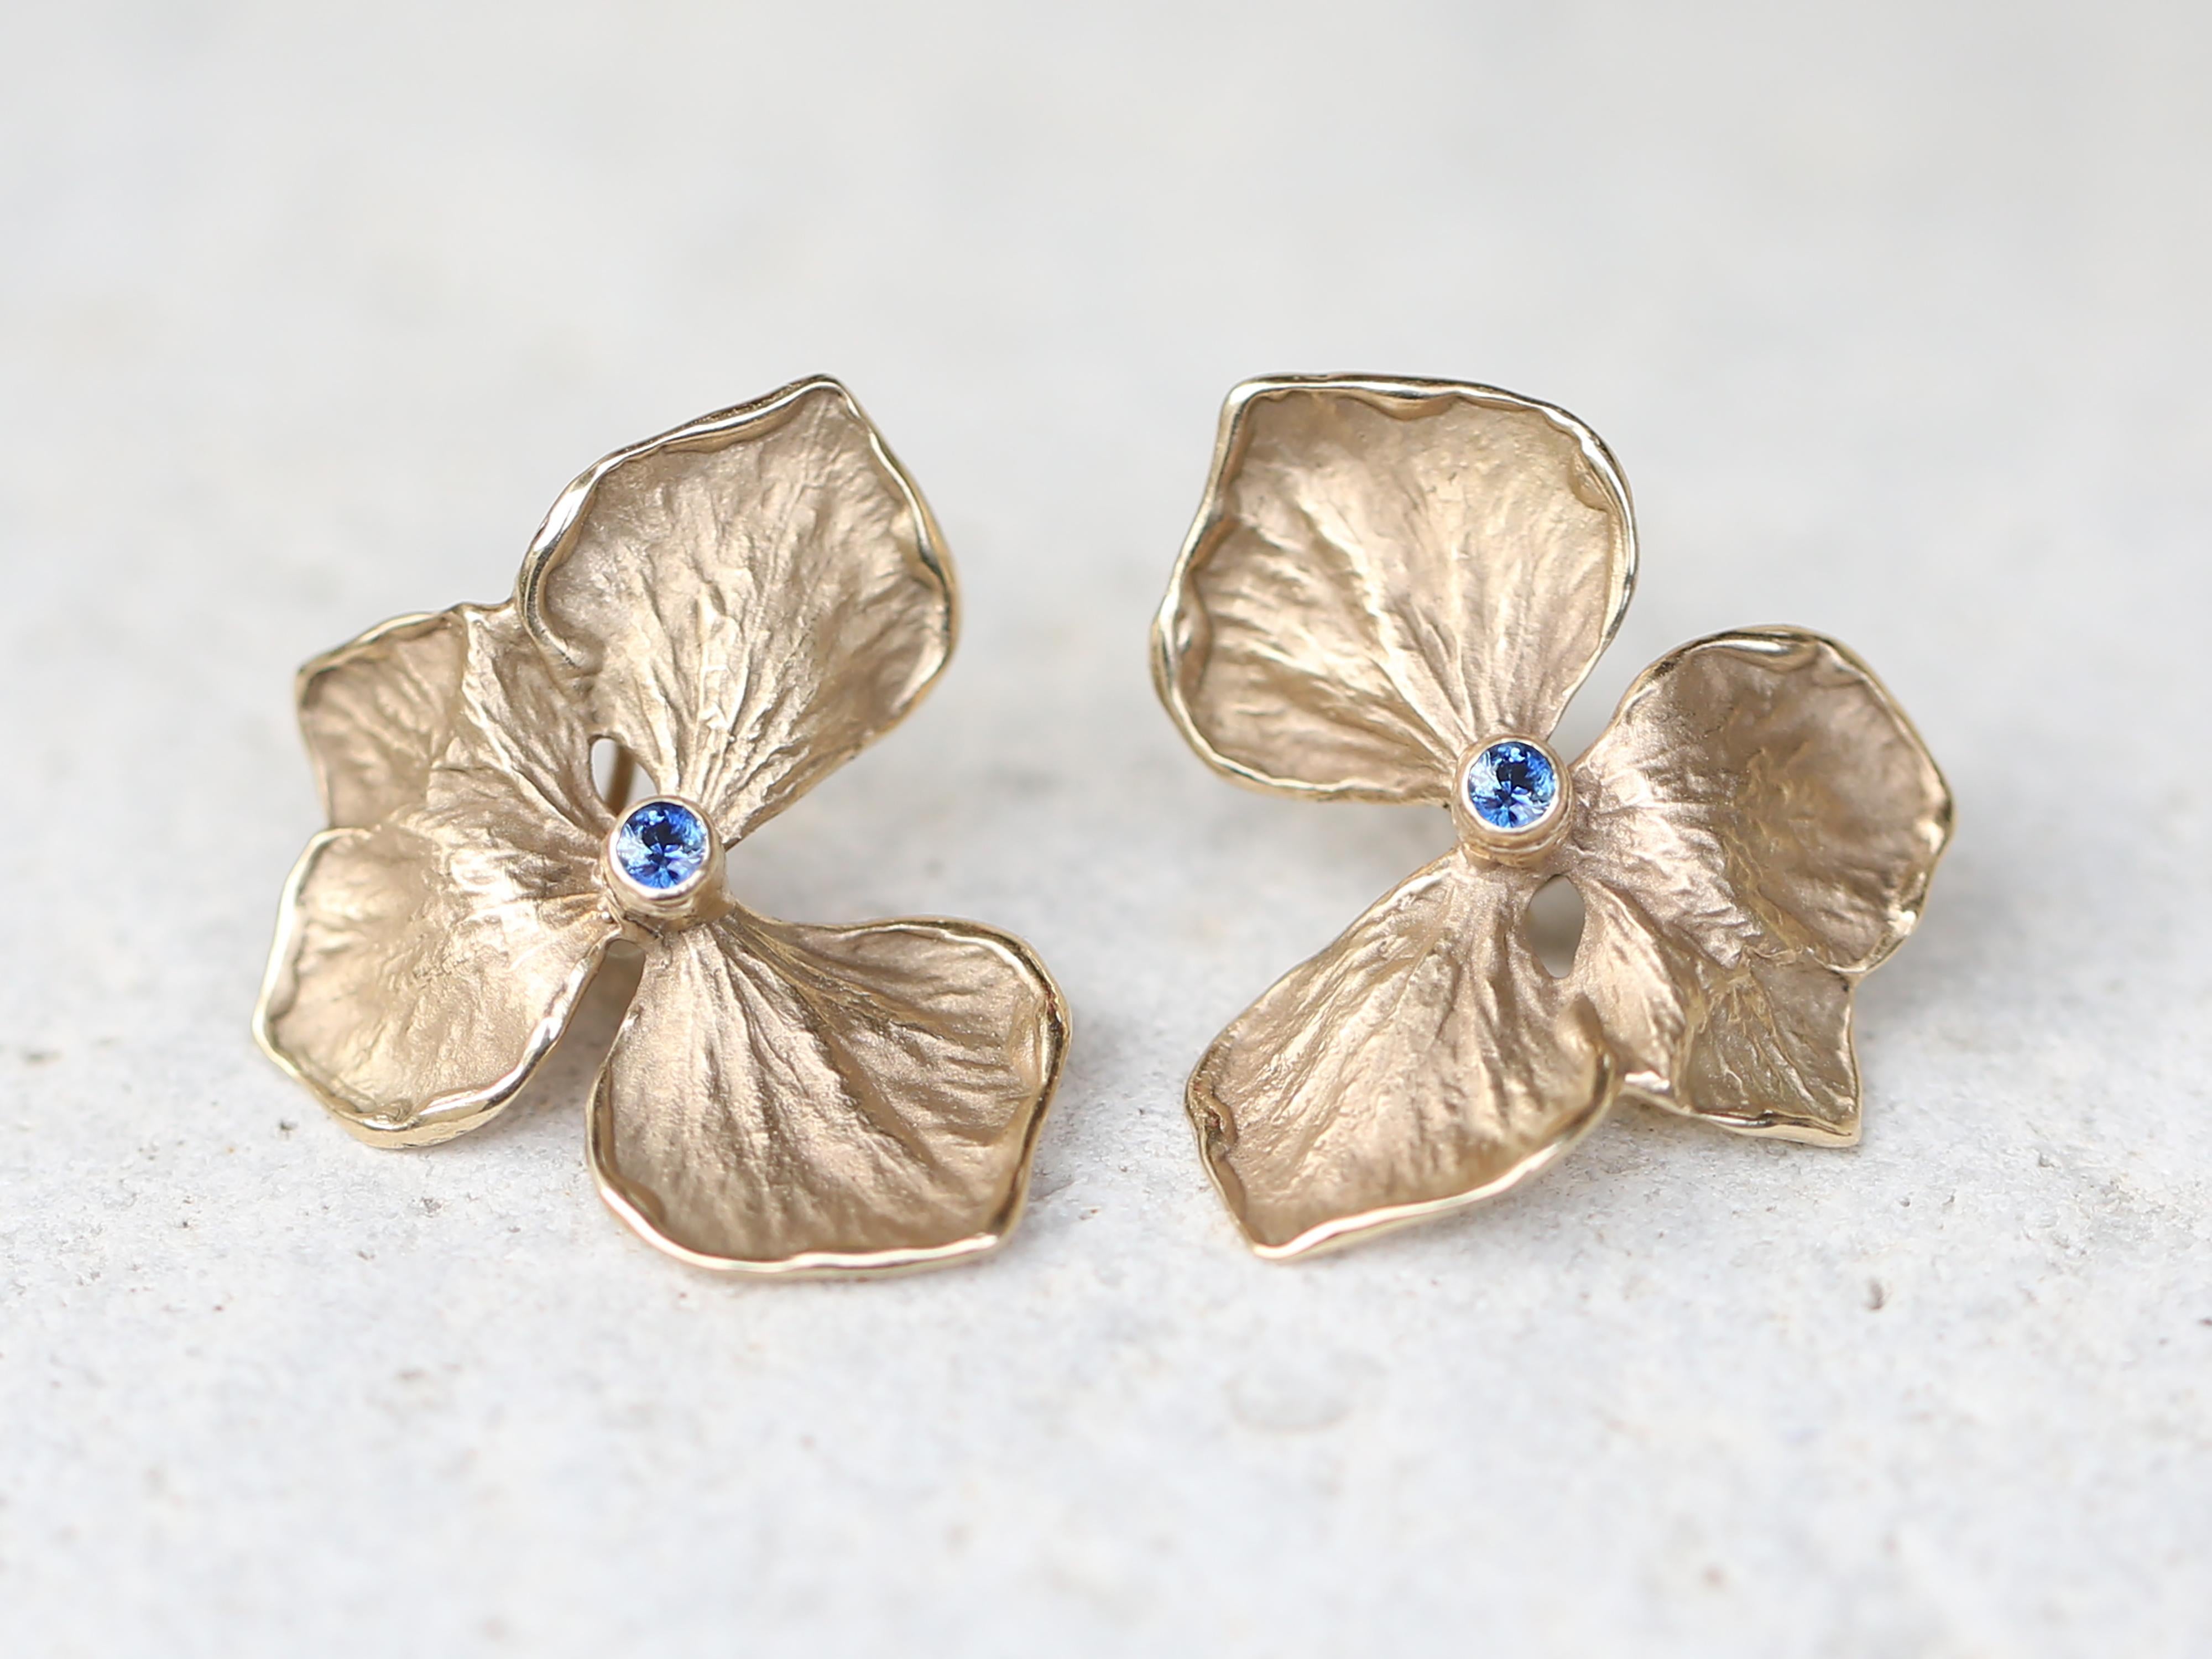 Large Solid Yellow Gold Hydrangea Flower Earrings

These unique earrings are made having a hydrangea flower as a source of inspiration. Each flower is crafted in wax and then cast in gold.

Materials: Flower and Omega Clip: Solid 14k Gold
Size